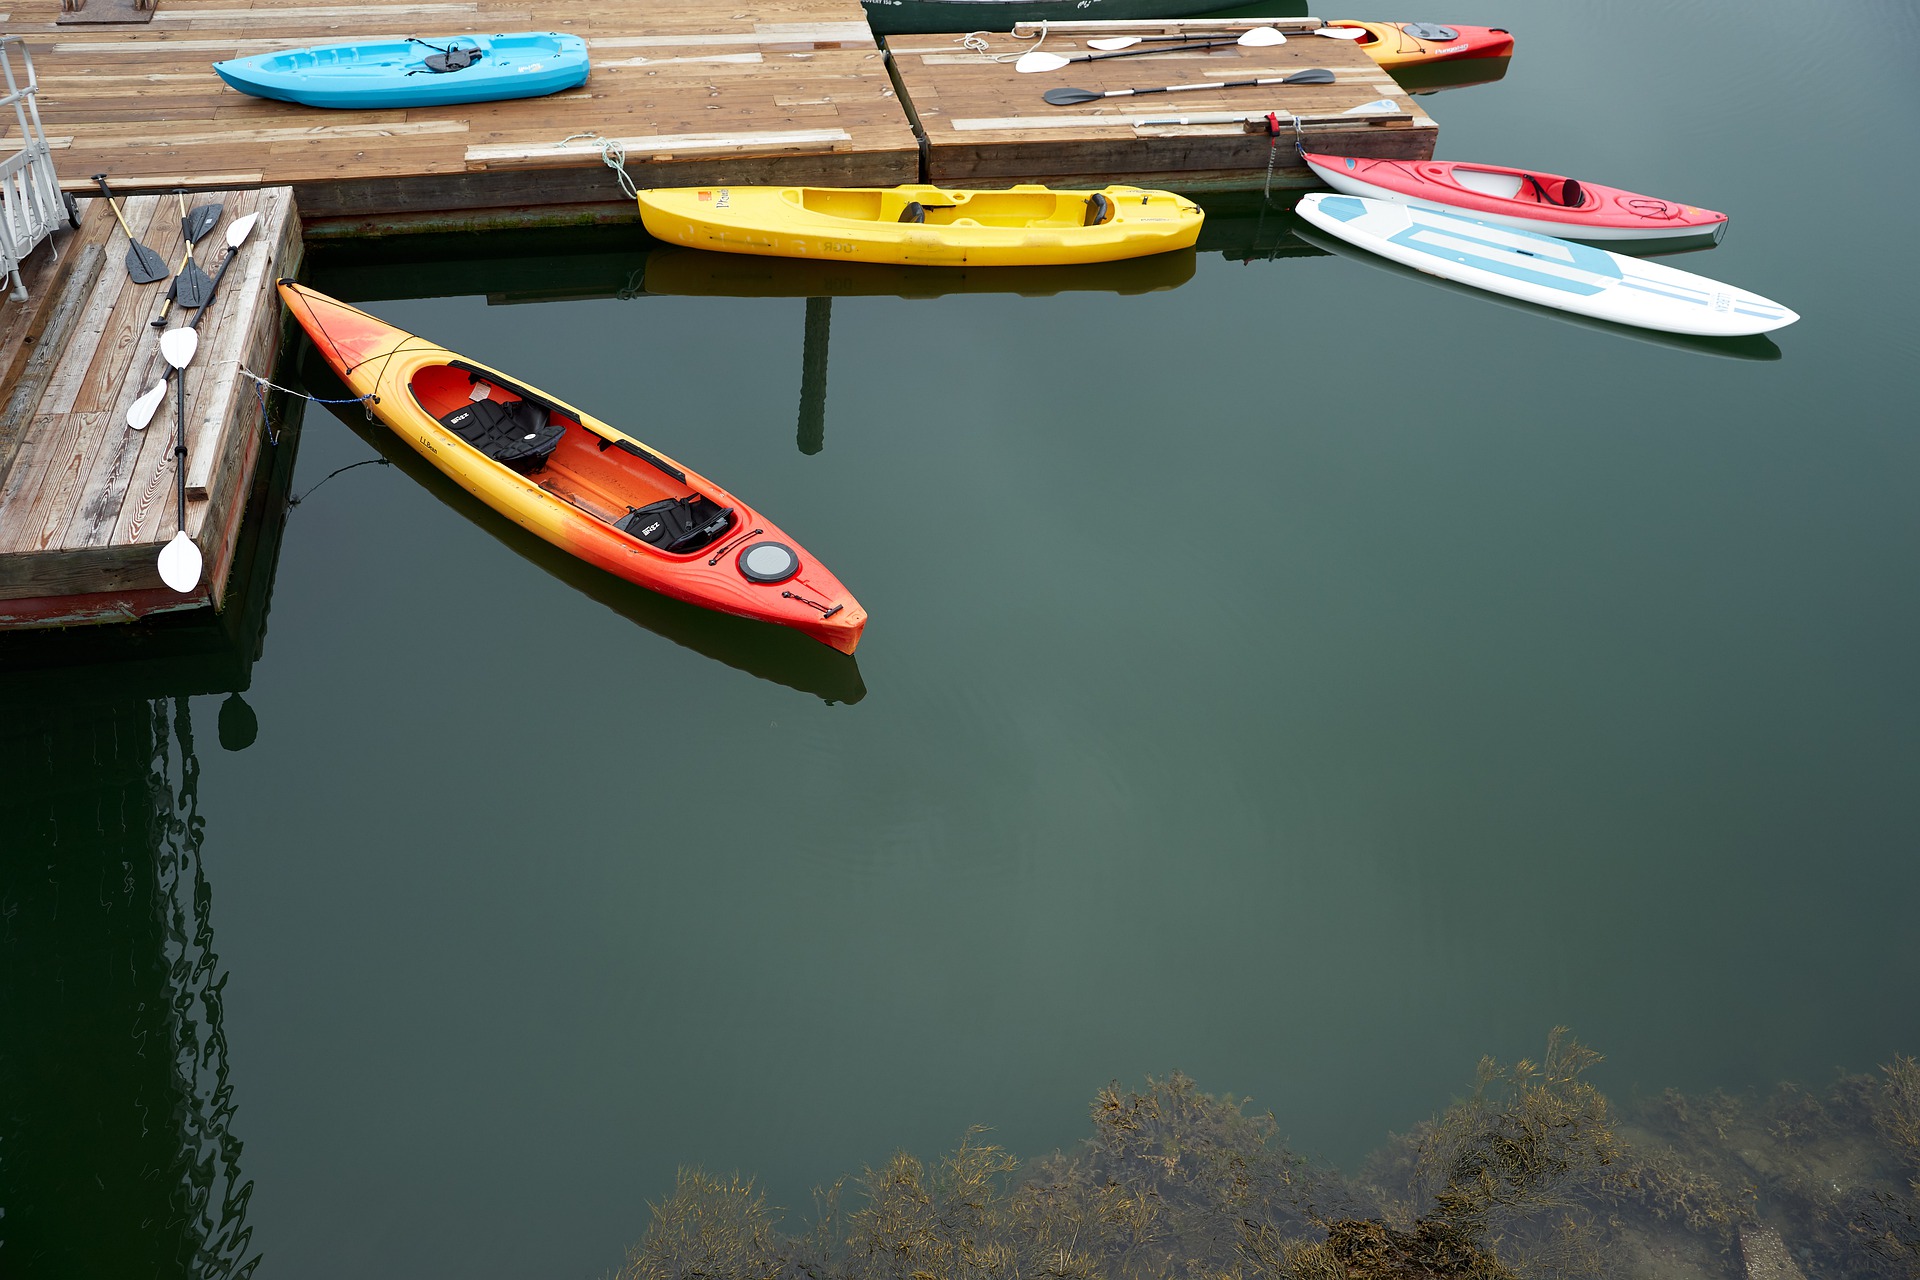 Boat dock surrounded by kayaks and paddleboards on the Maine coast